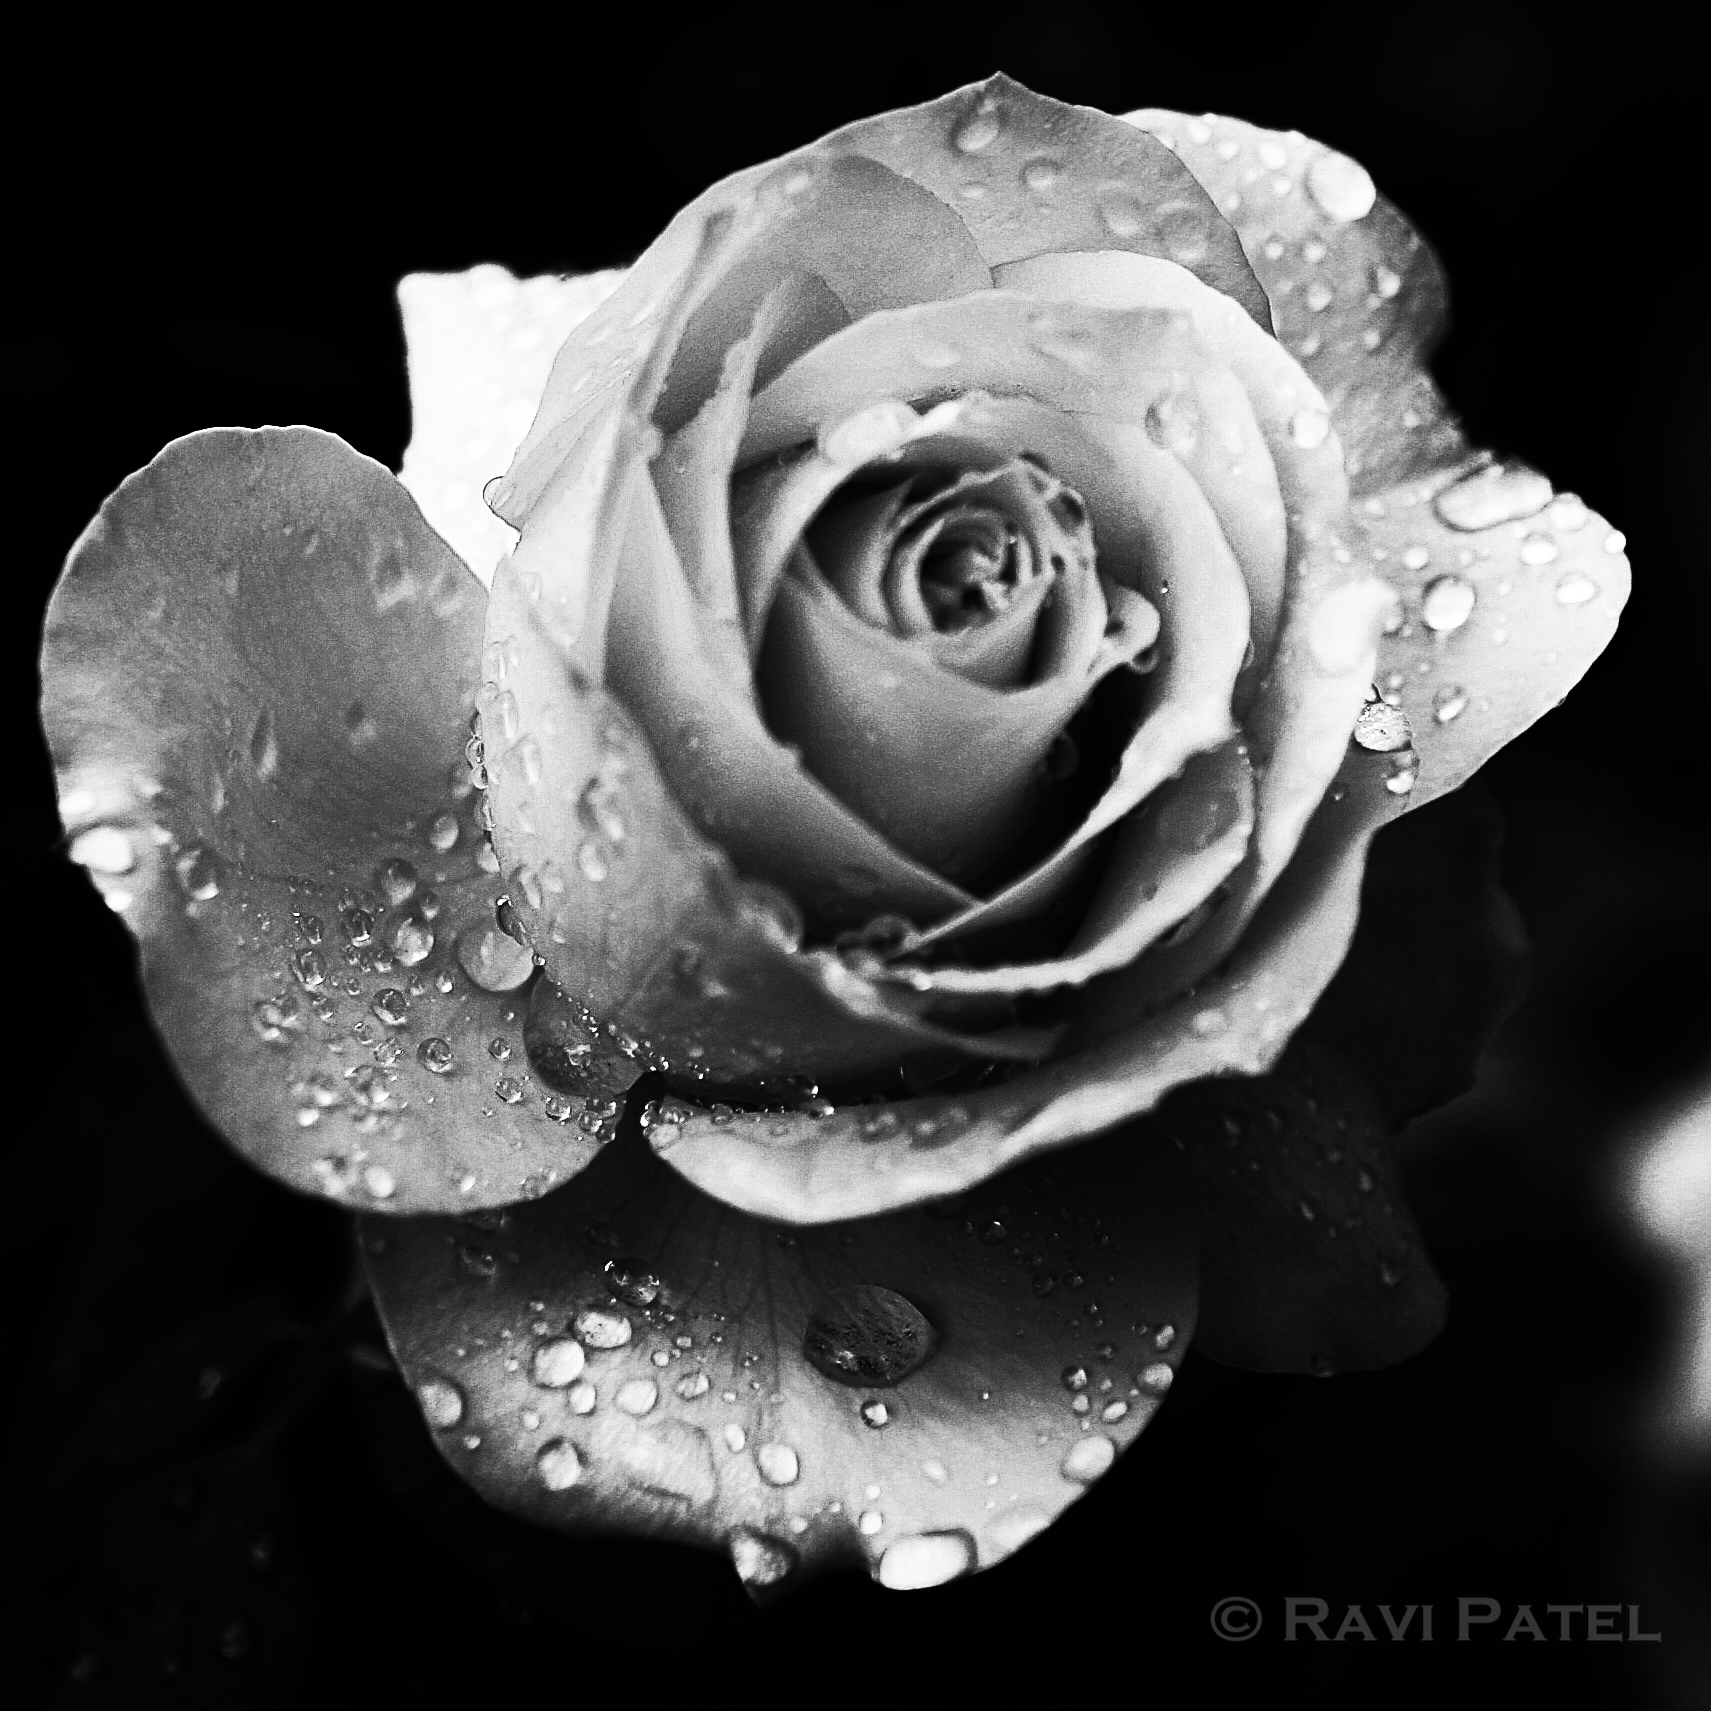 A Jeweled Rose | Photos by Ravi